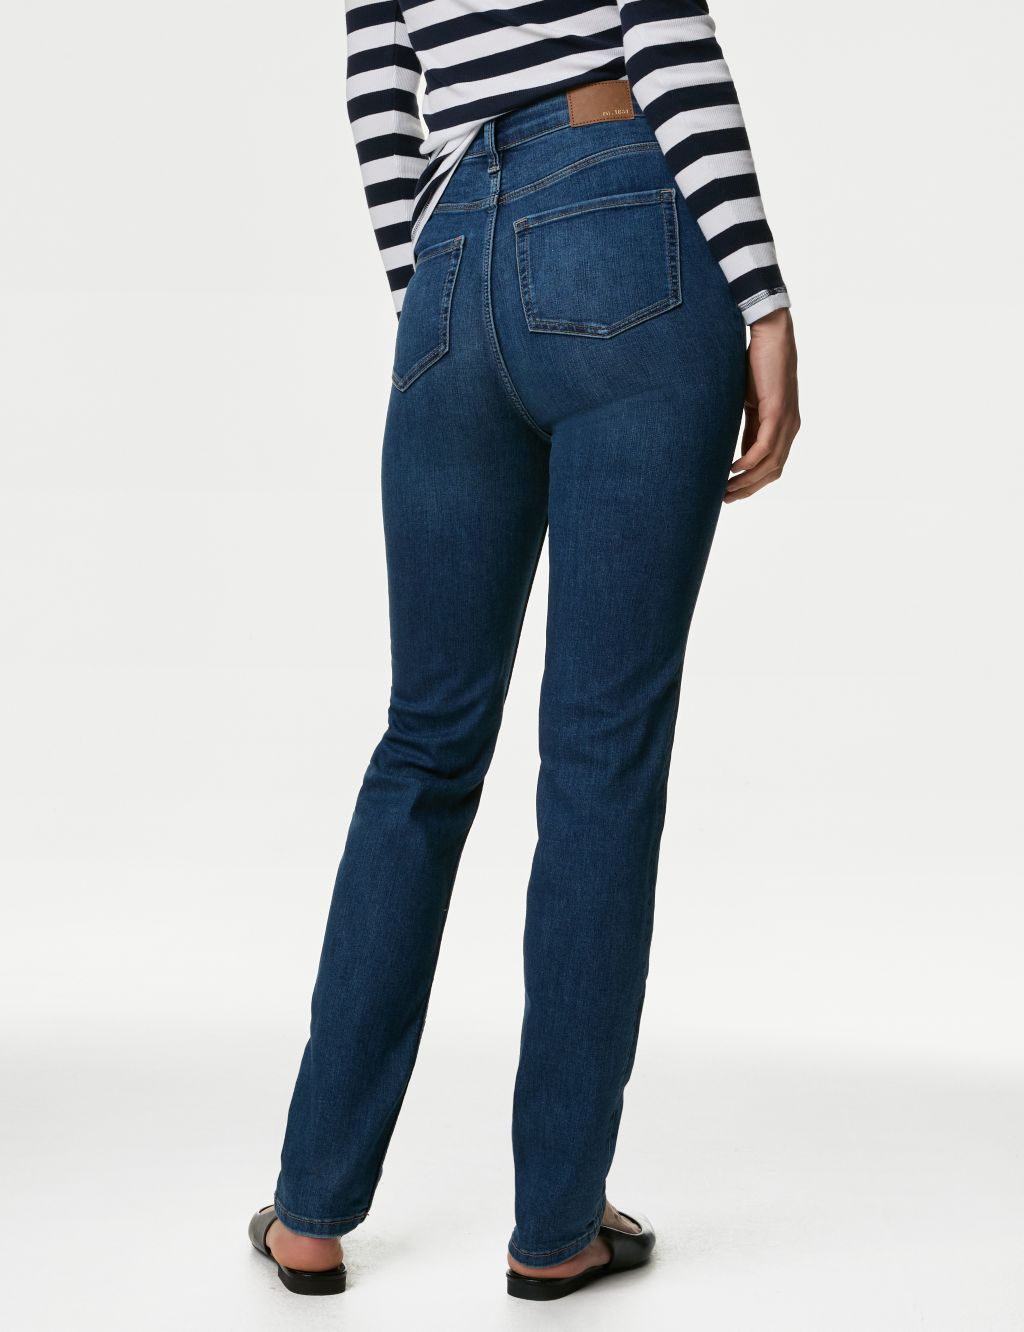 Sienna Supersoft Straight Leg Jeans image 4